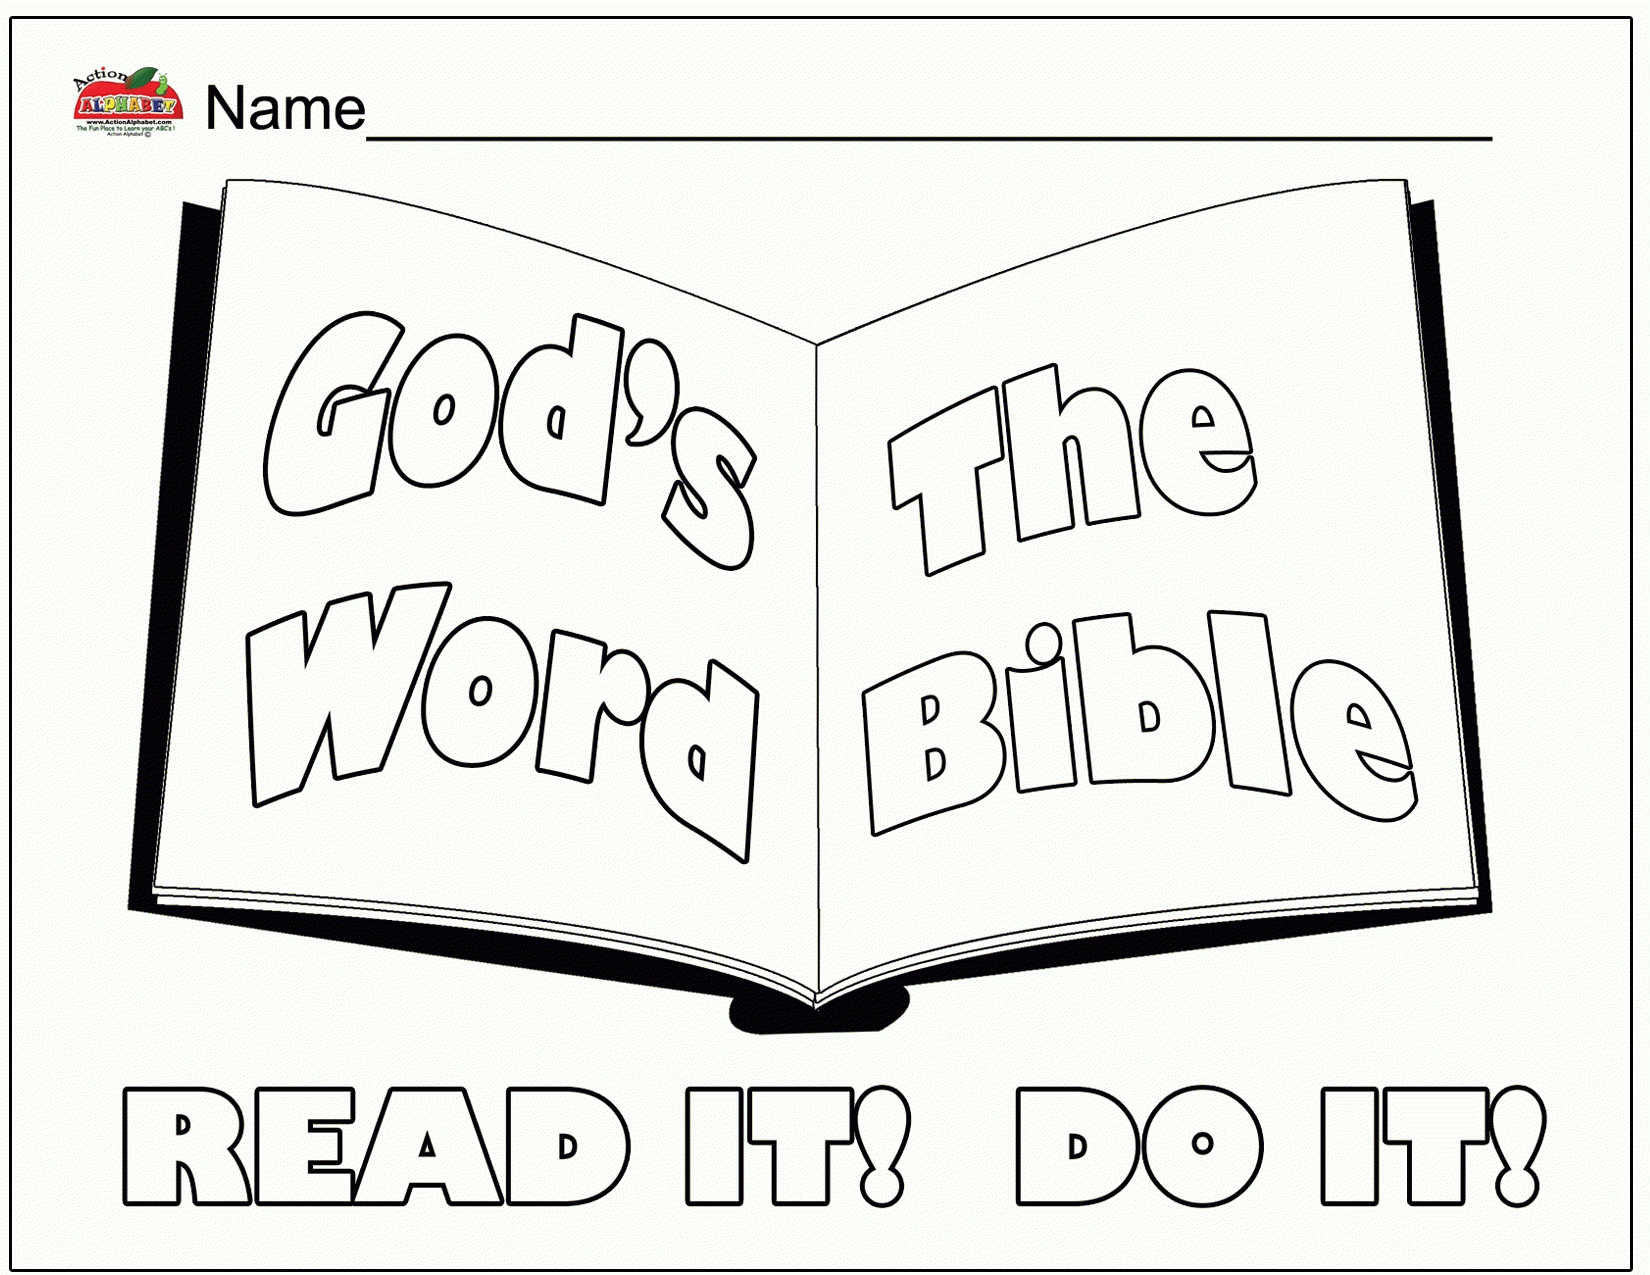 Coloring Pages : Bible Verseoring Pages For Toddlers Stunning Free - Bible Lessons For Toddlers Free Printable